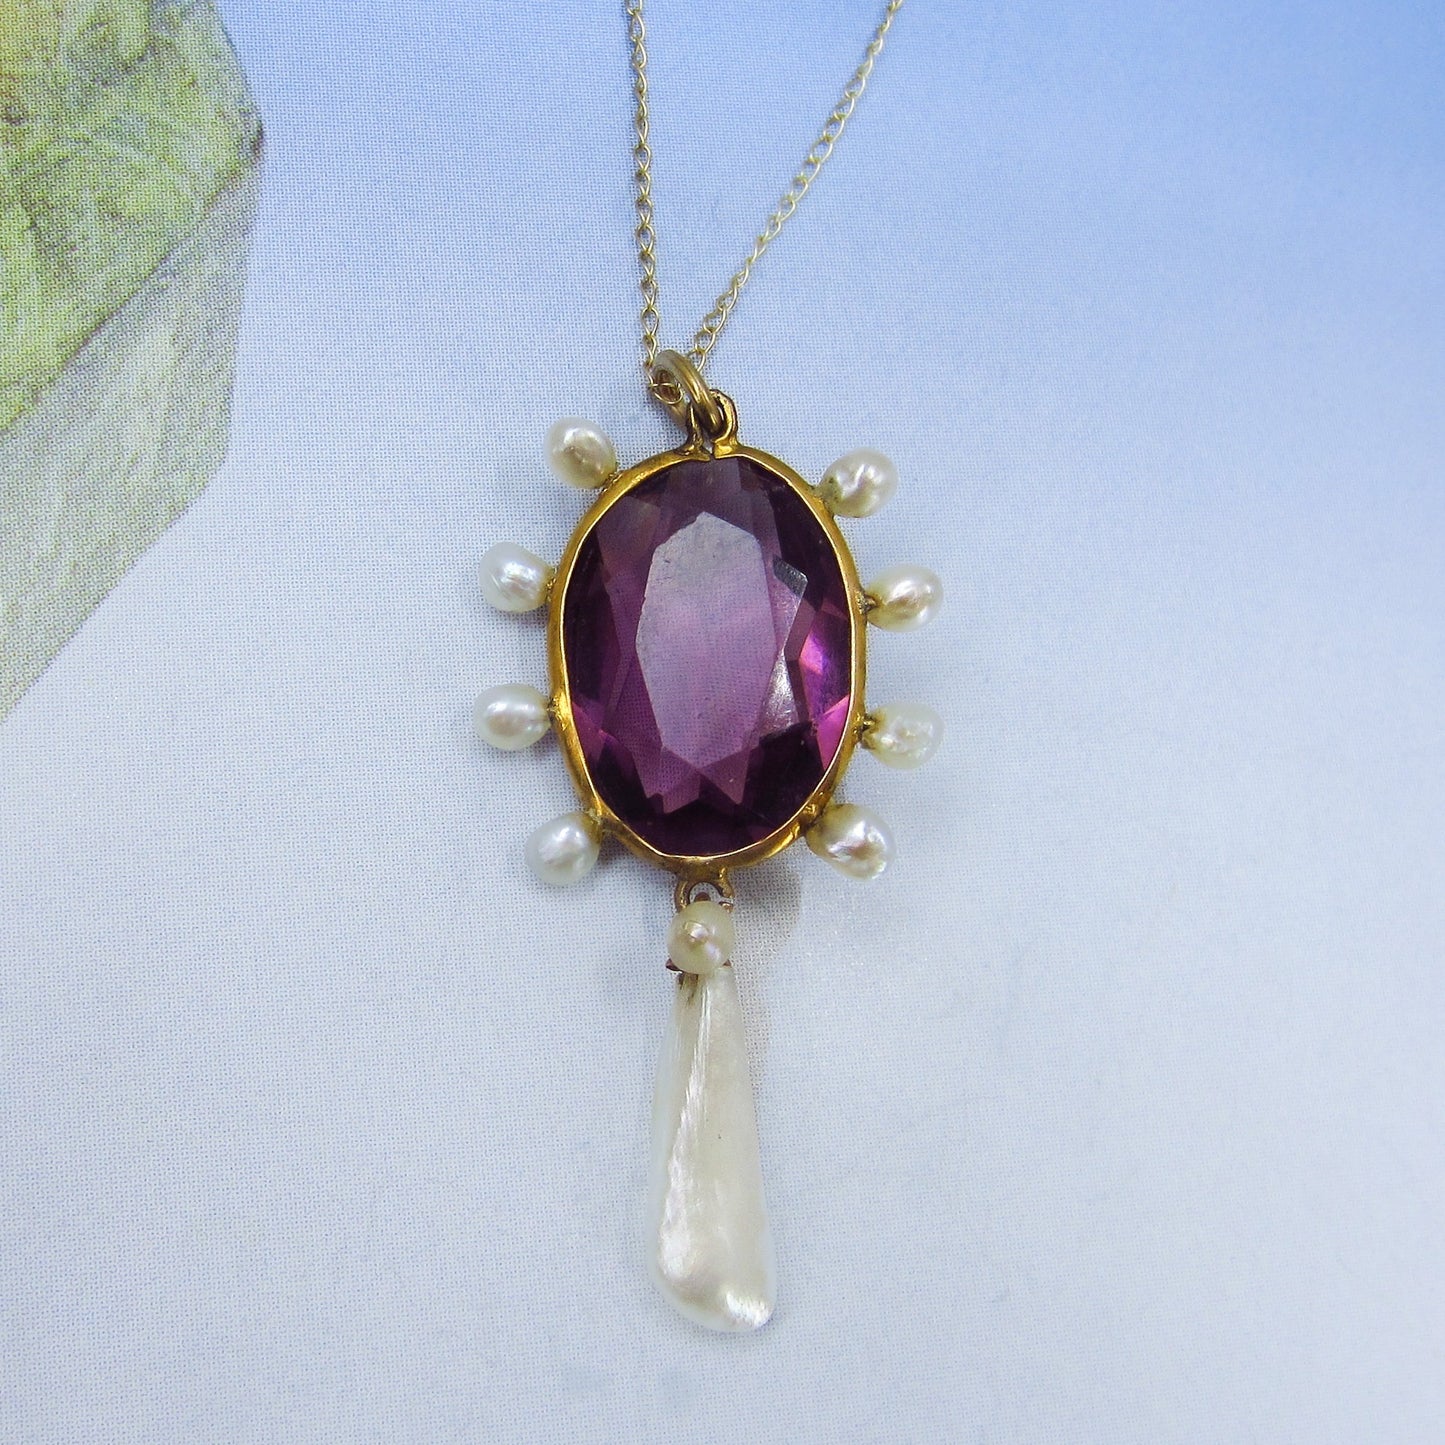 SOLD-Edwardian Amethyst and Pearl Pendant 14k c. 1900